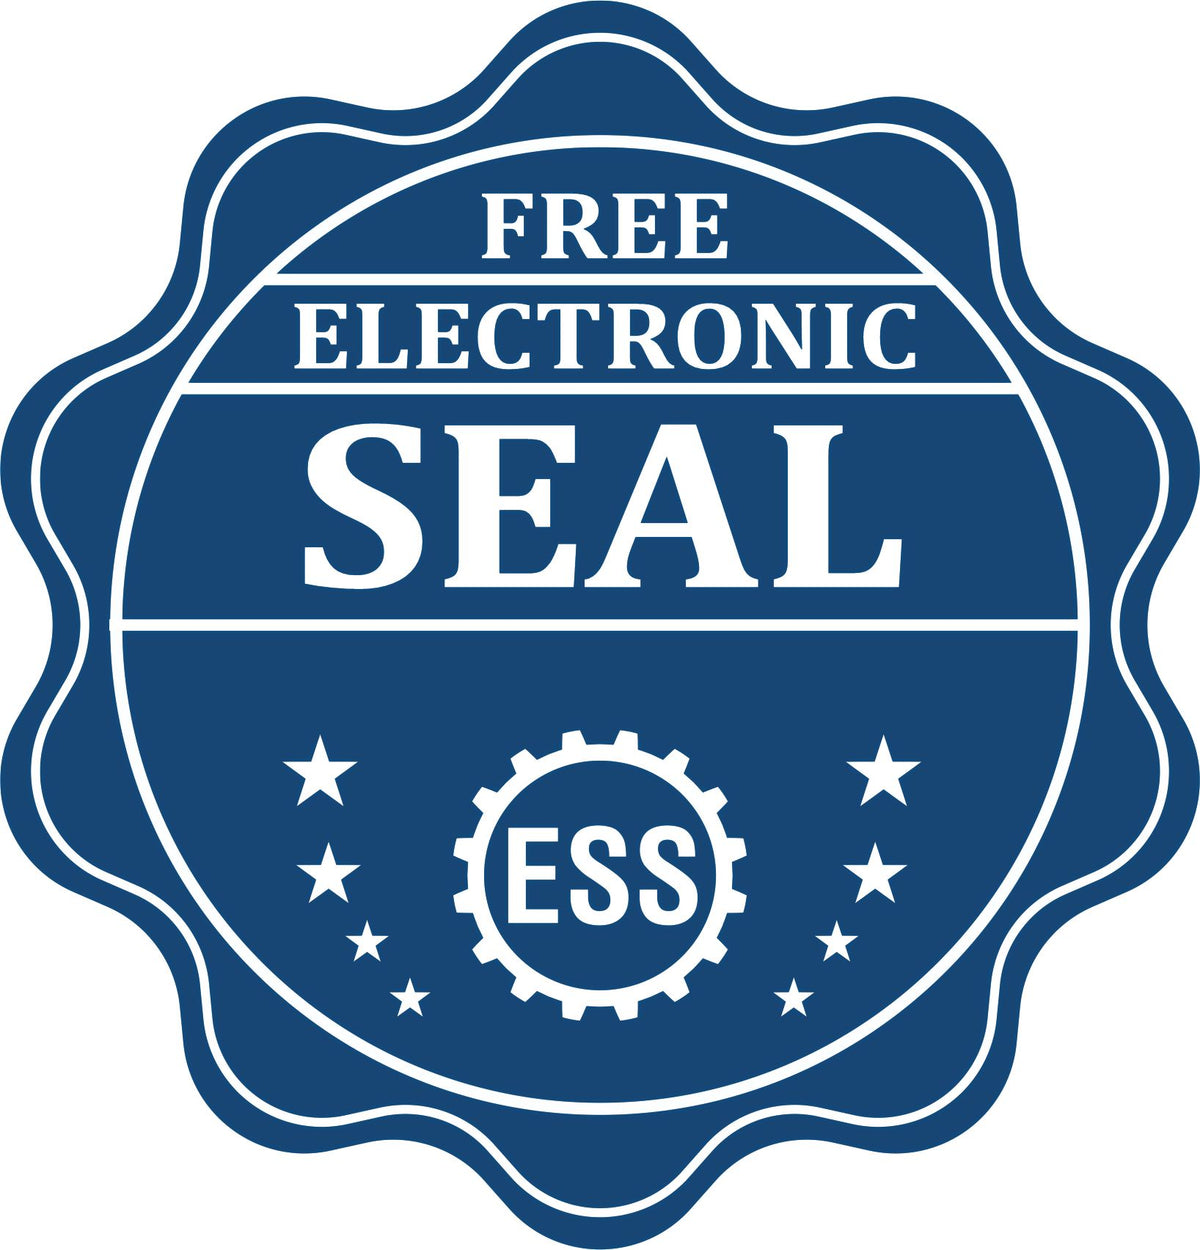 A badge showing a free electronic seal for the Soft Arizona Professional Engineer Seal with stars and the ESS gear on the emblem.